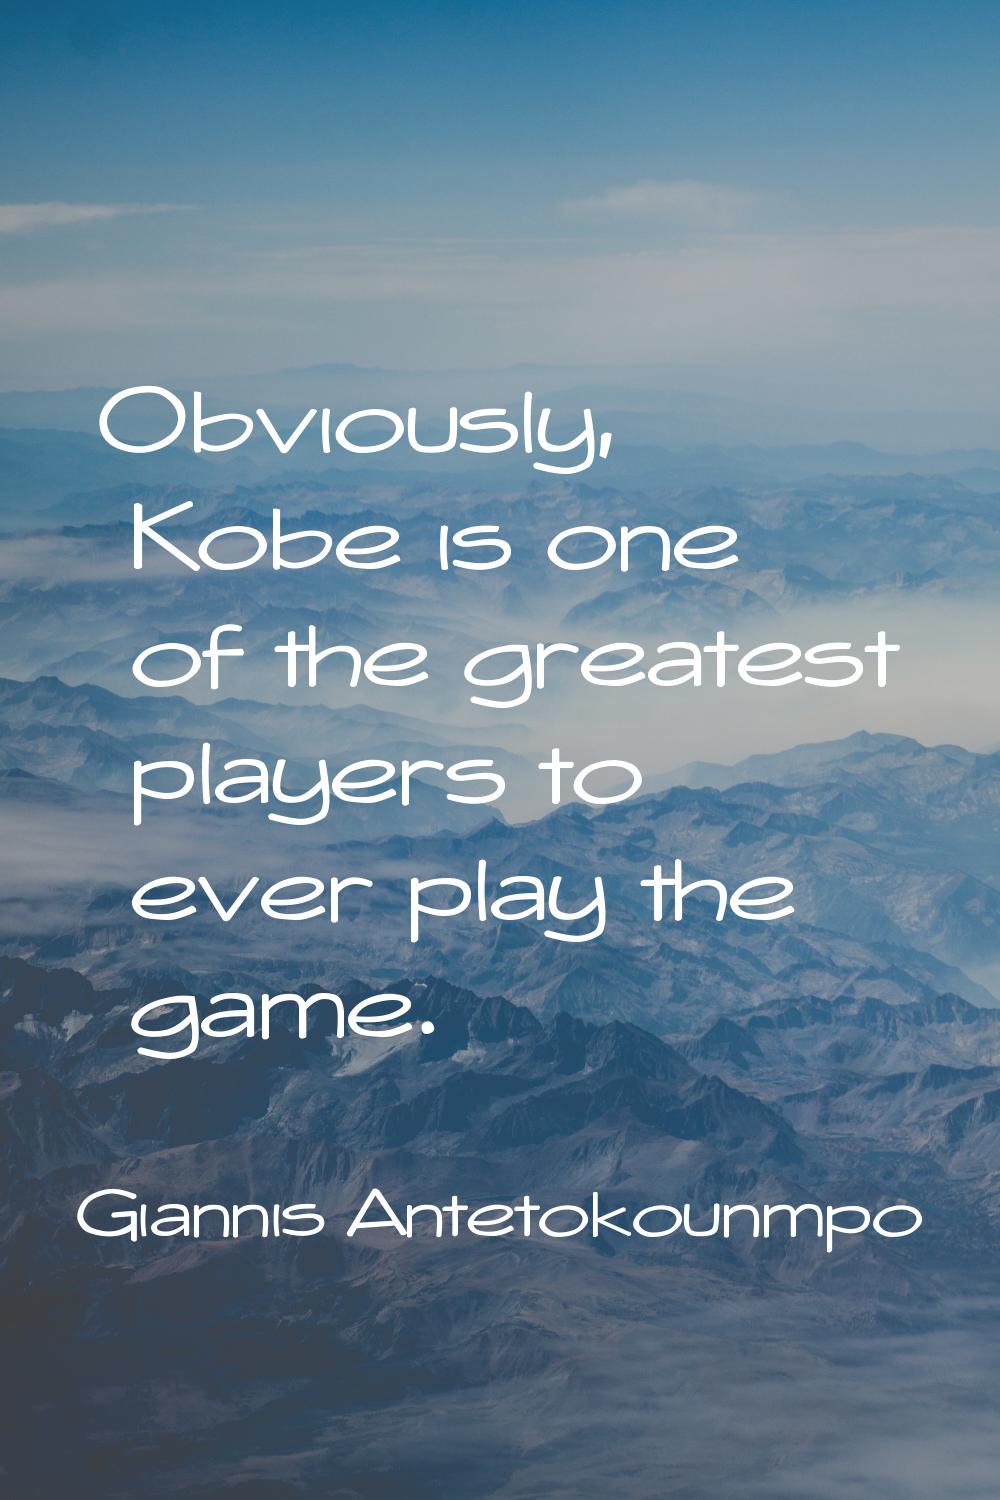 Obviously, Kobe is one of the greatest players to ever play the game.